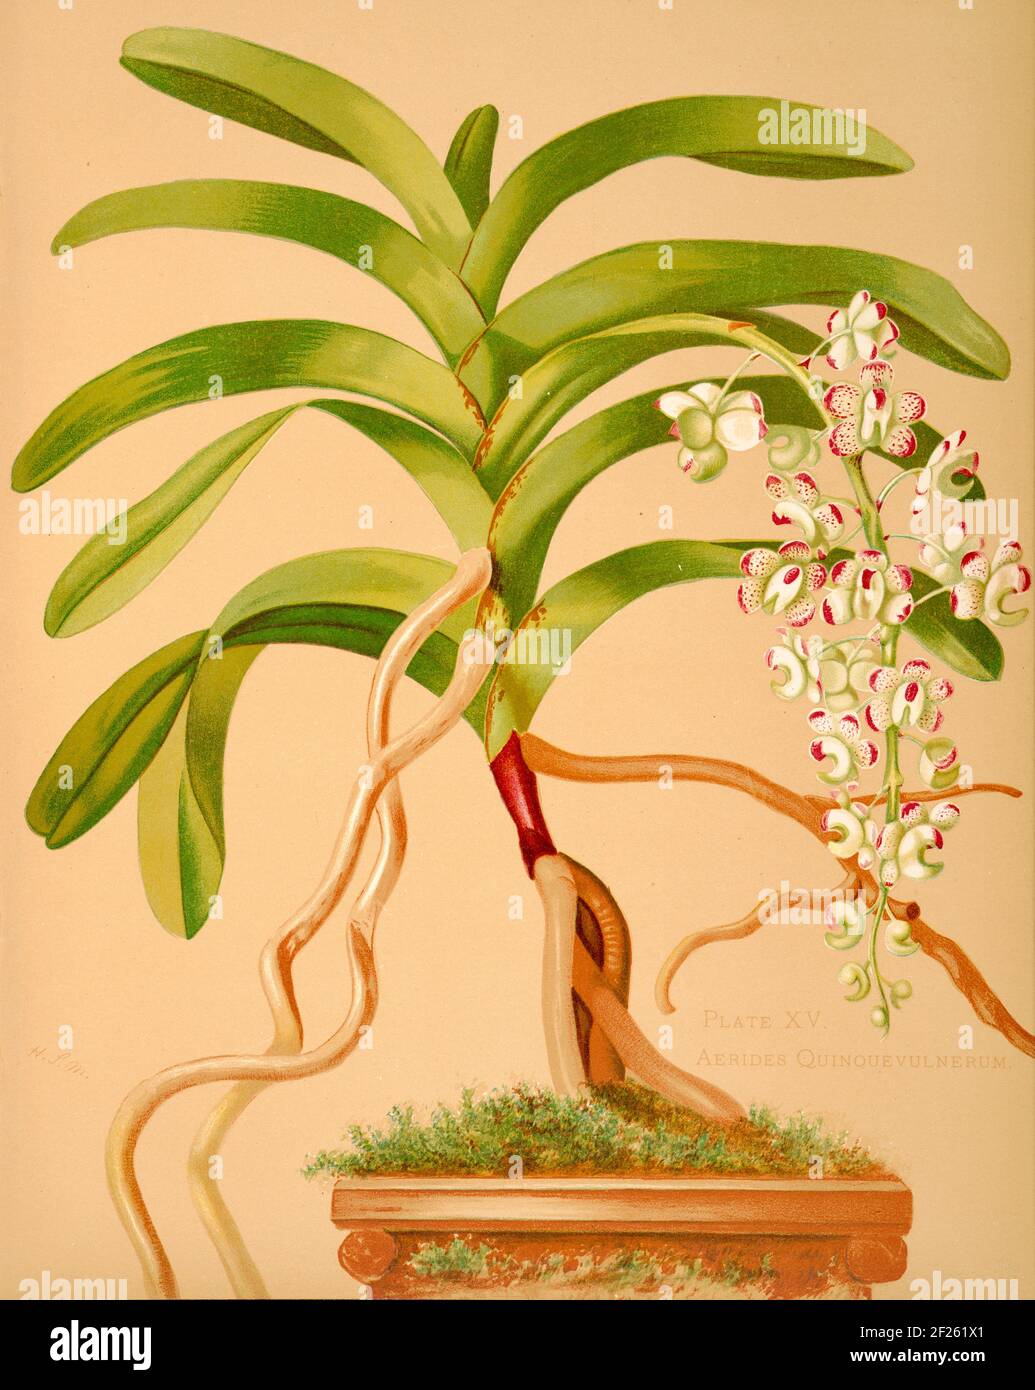 Harriet Stewart Miner's botanical vintage illustration from Orchids - The Royal Family of Plants from 1885 - Aerides quinquevulnerum or Air Plant. Stock Photo